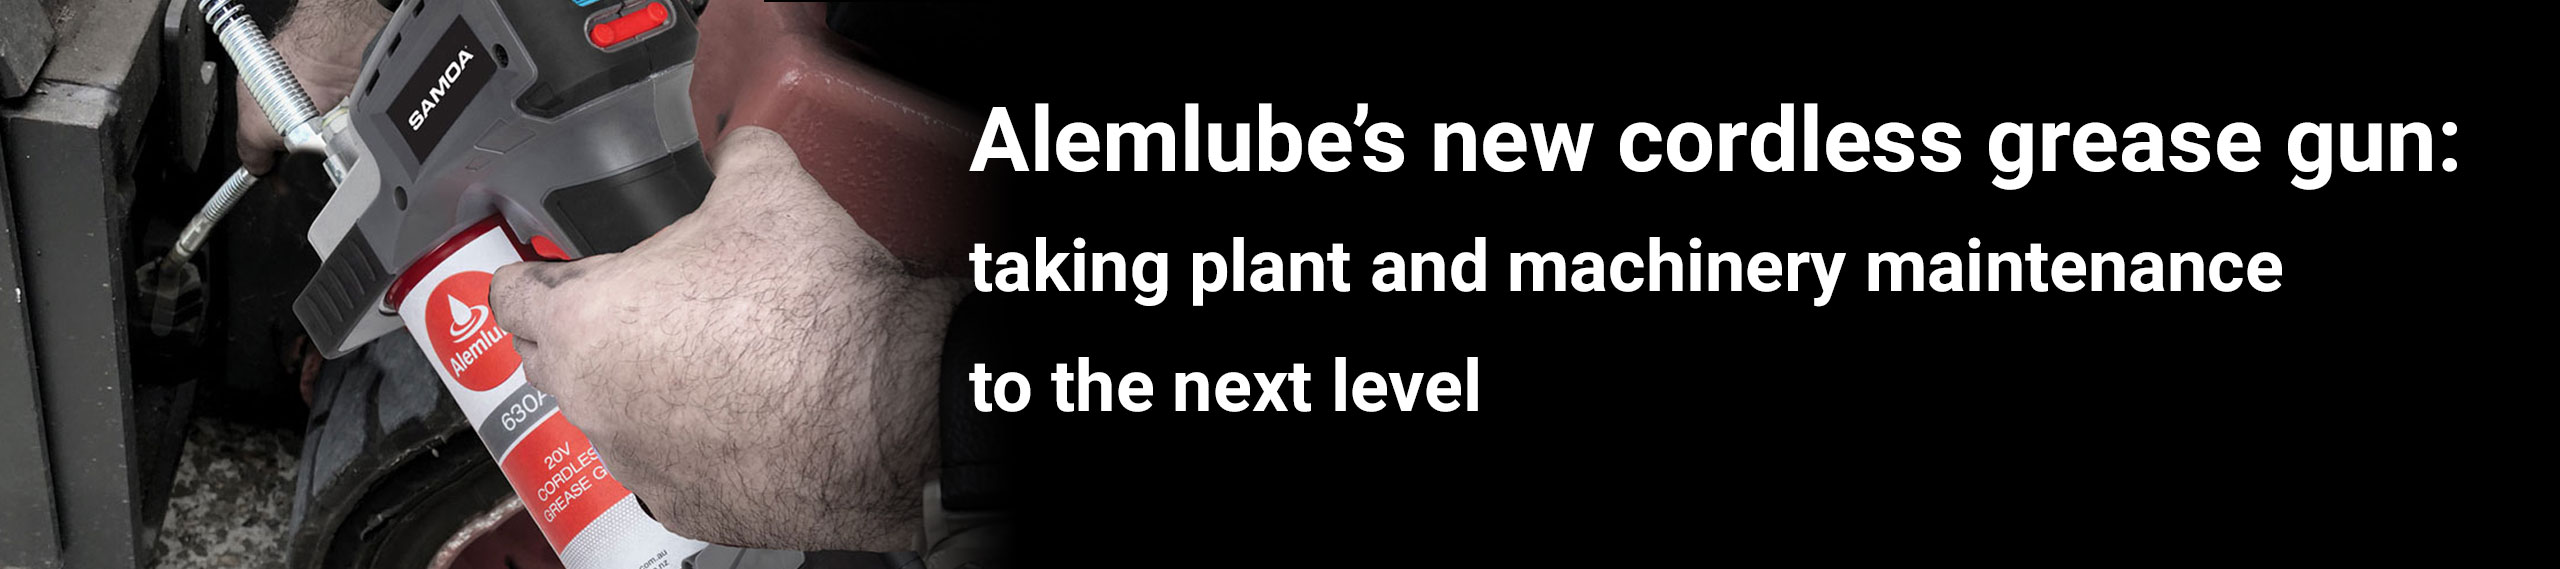 Alemlube’s new cordless grease gun: taking plant and machinery maintenance to the next level